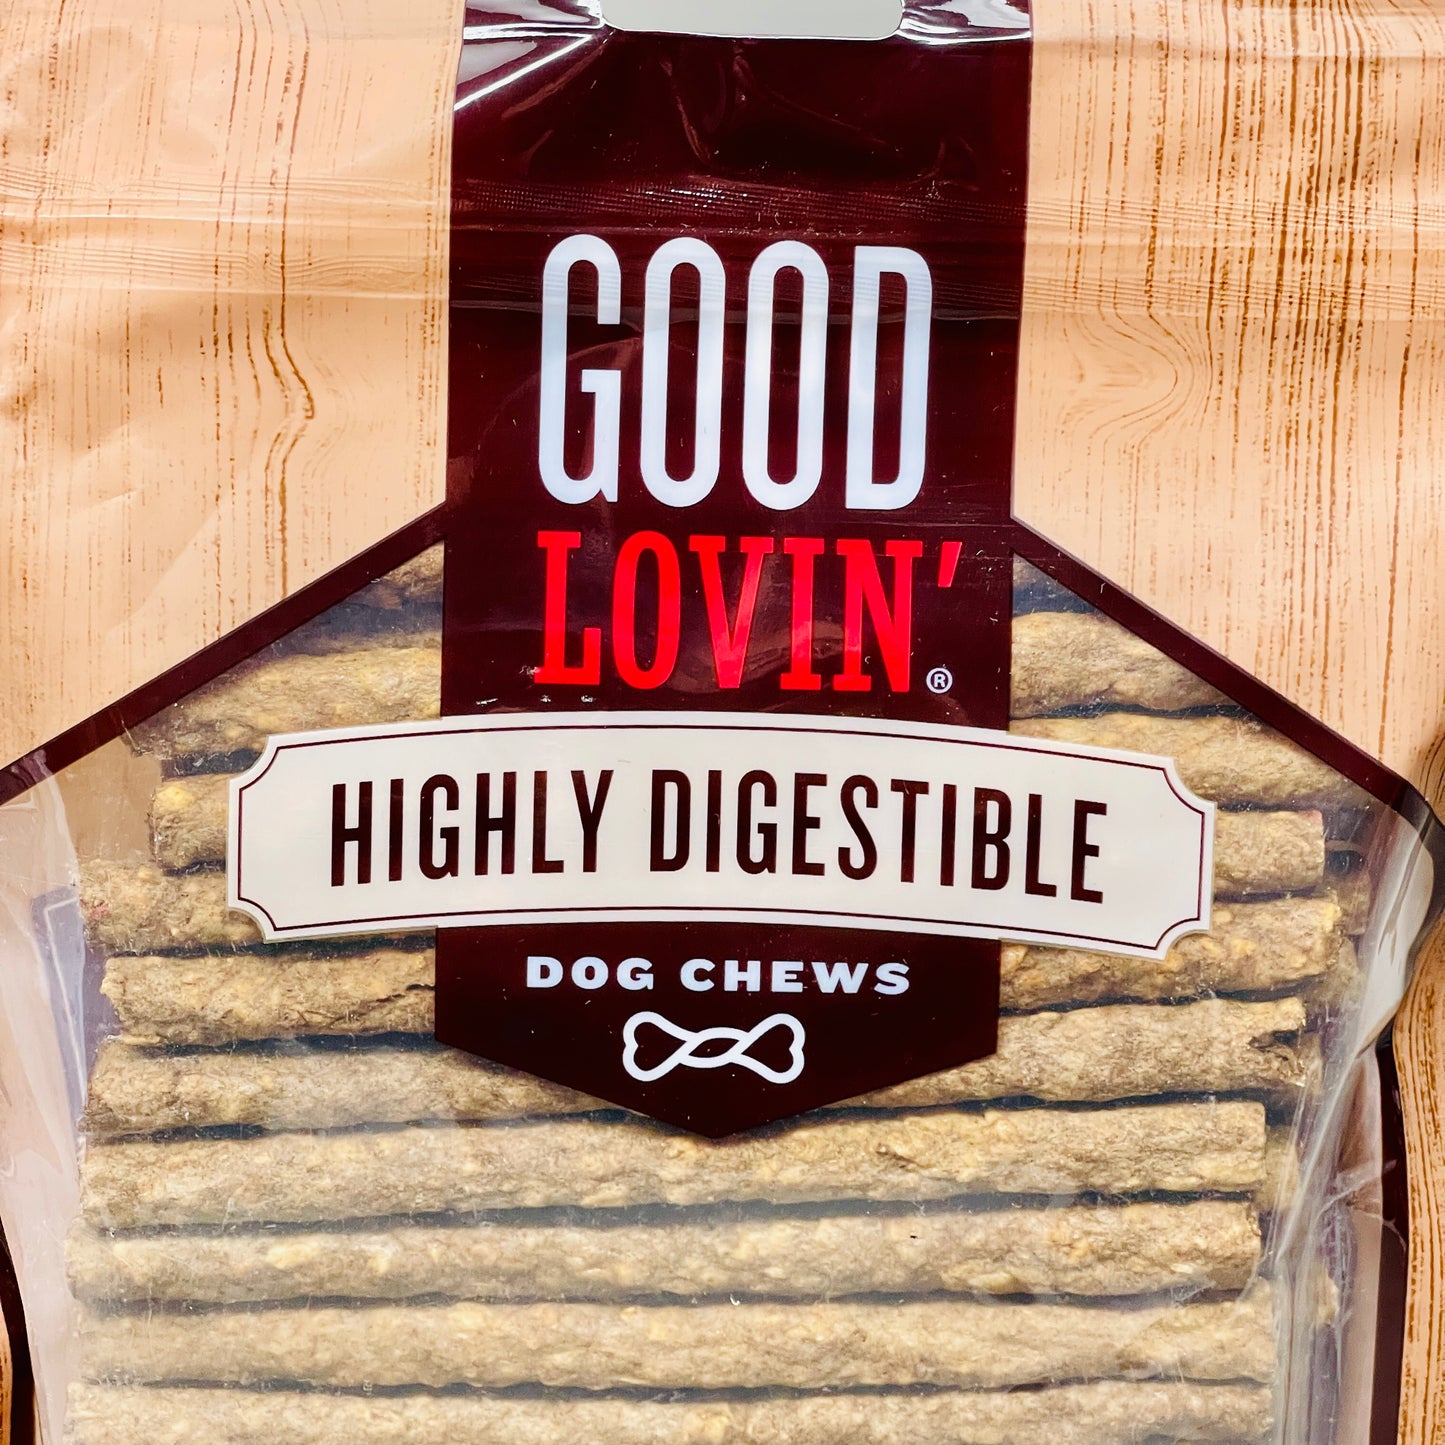 GOOD LOVIN’ Highly Digestible Dog Chews 1 LB, 7.1O 80 Count Peanut Butter Basted 08/25